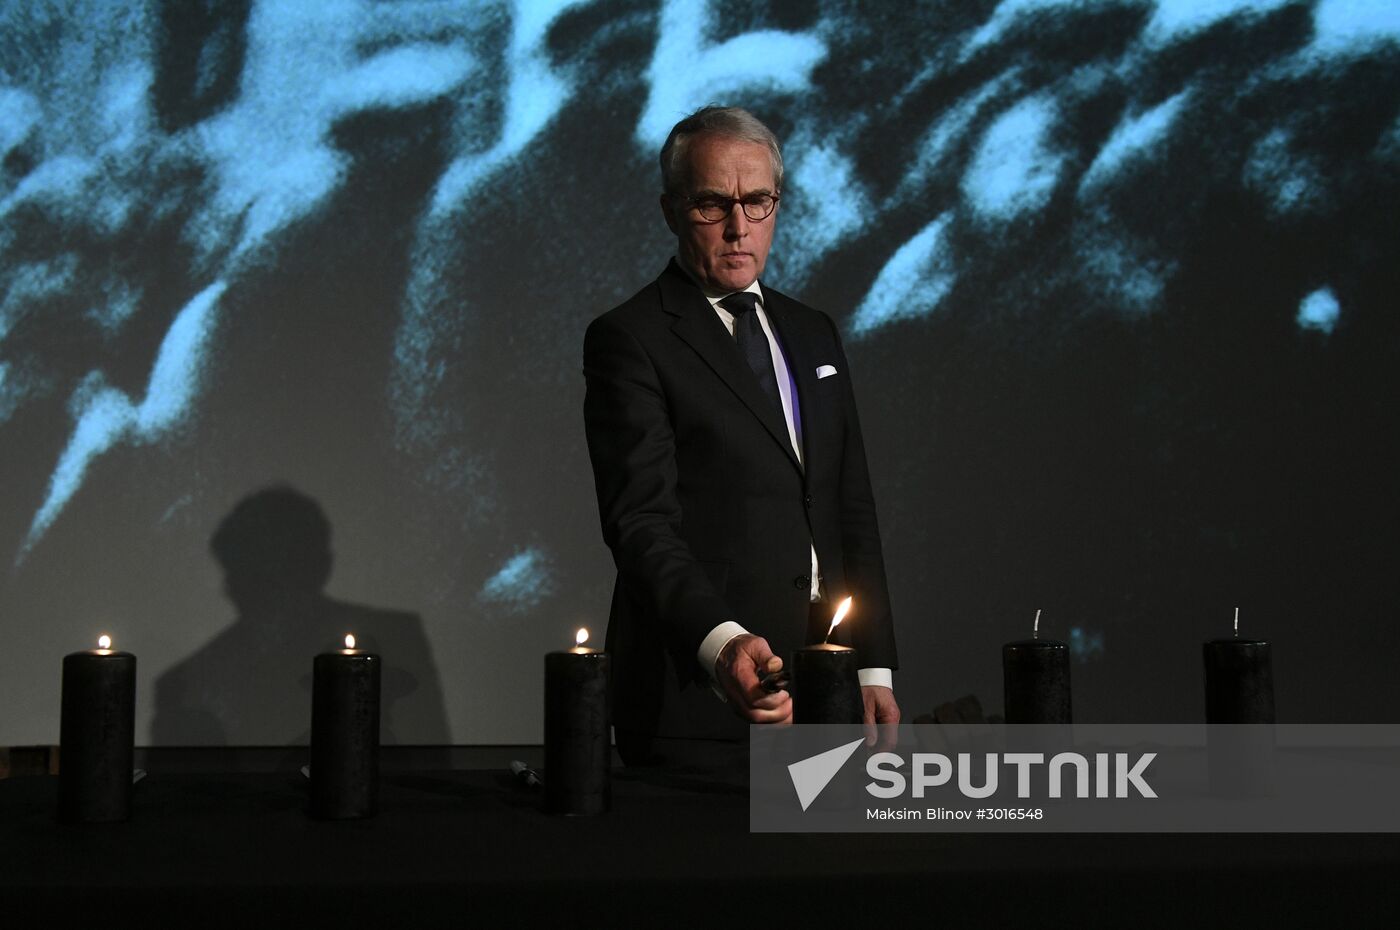 Candle Lighting Ceremony on International Holocaust Remembrance Day